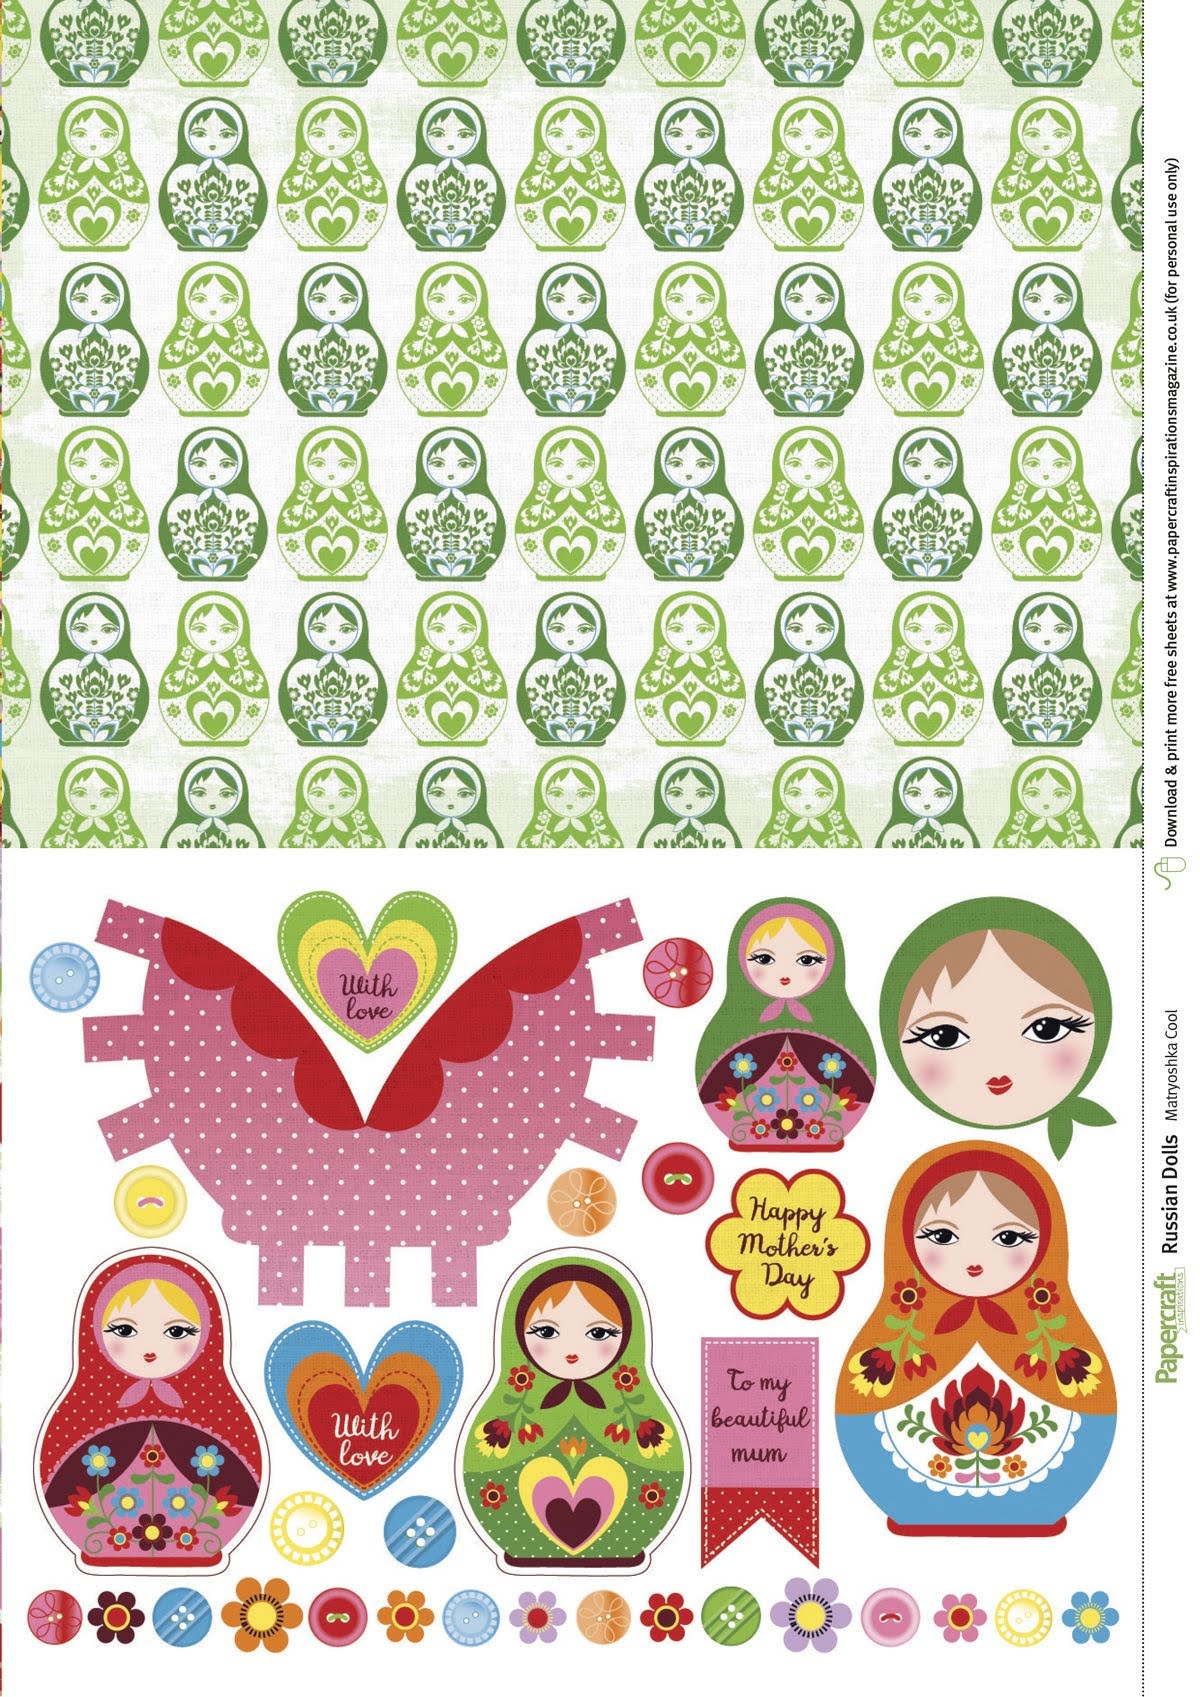 Free Printable Russian Doll Papers From Papercraft Inspirations 162 Papercraft Inspirations Free Scrapbook Paper Paper Crafts Russian Doll